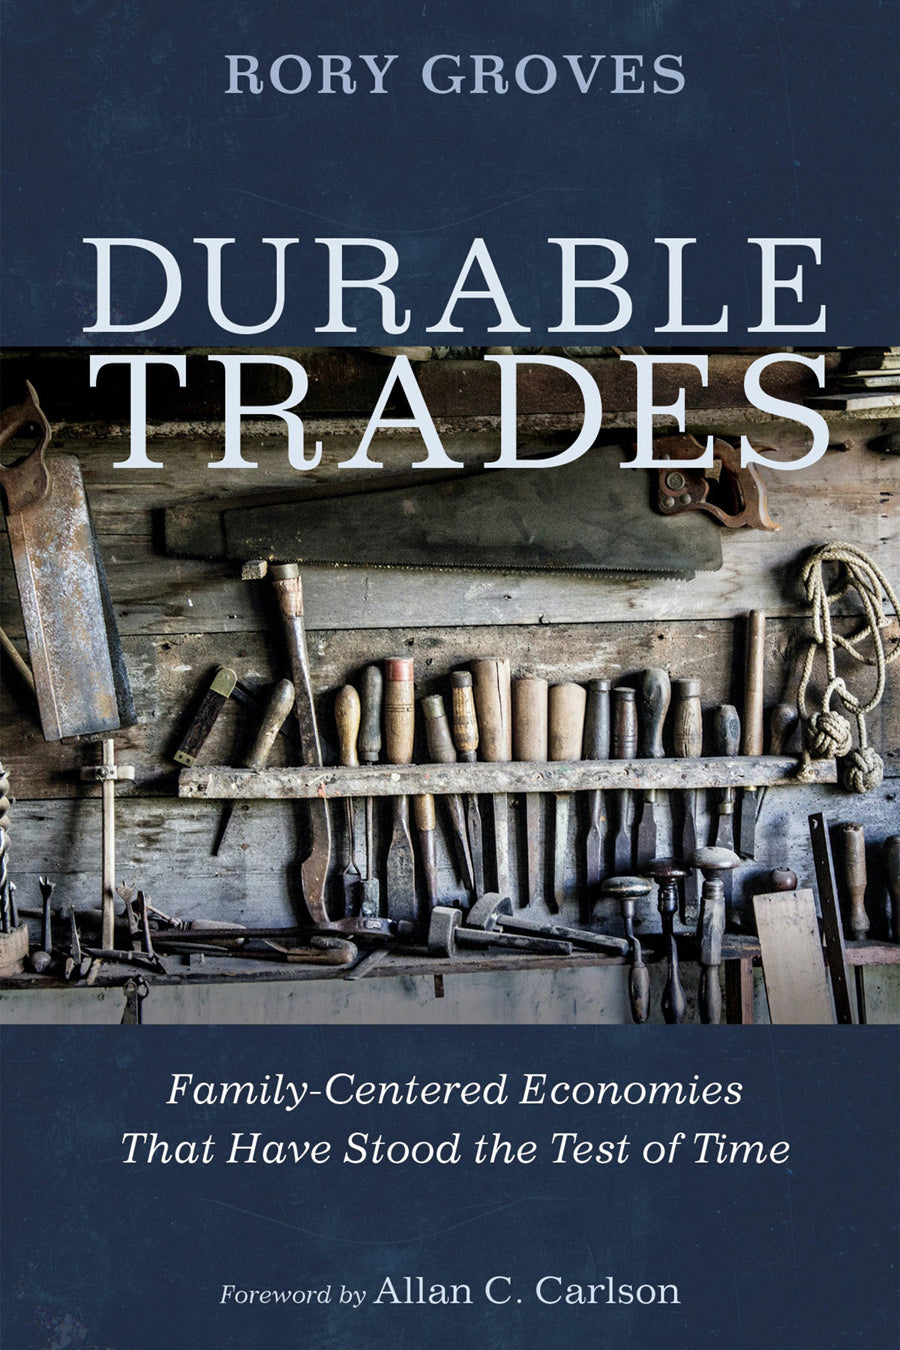 DURABLE TRADES: FAMILY-CENTERED THAT HAVE STOOD THE TEST OF TIME